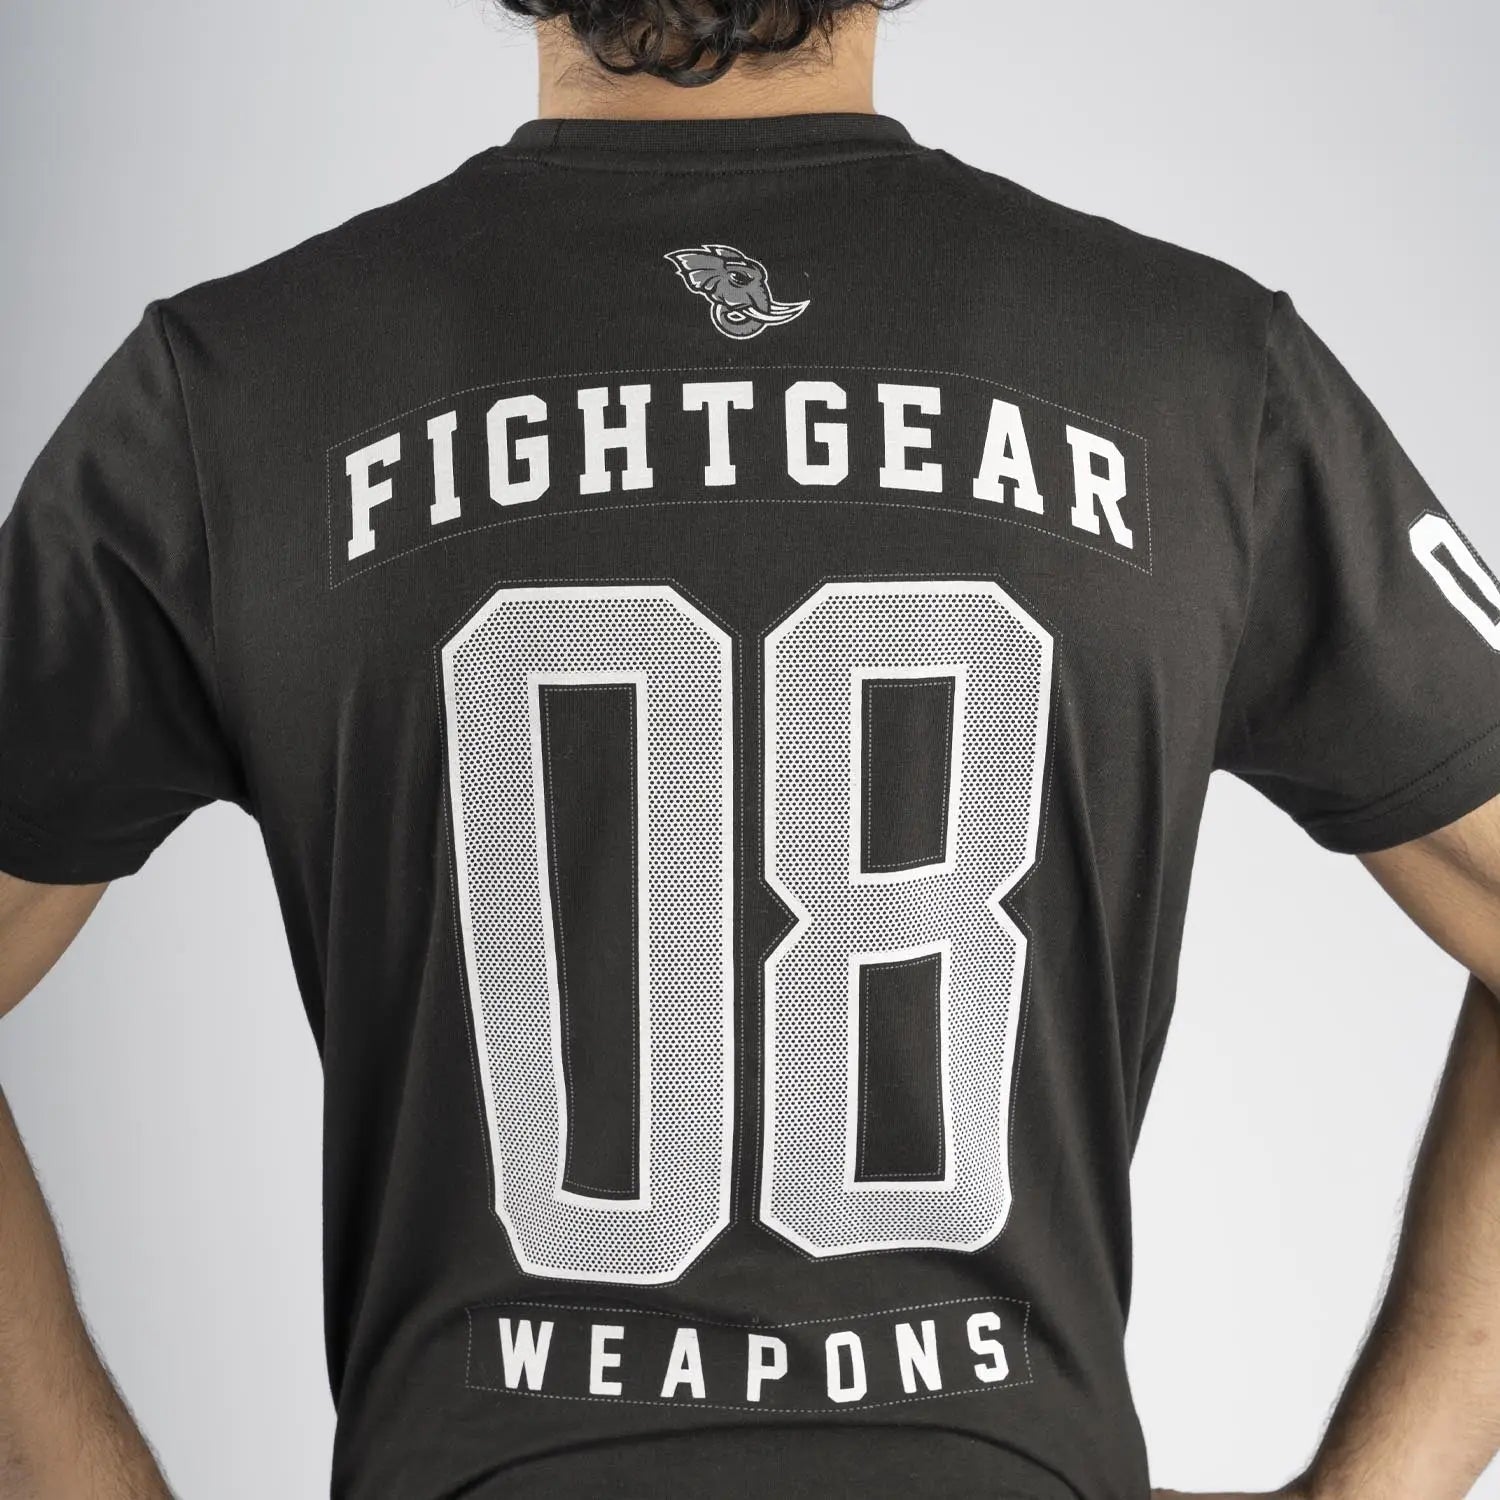 8 WEAPONS T-Shirt - Team 08 2.0 - Fight Co